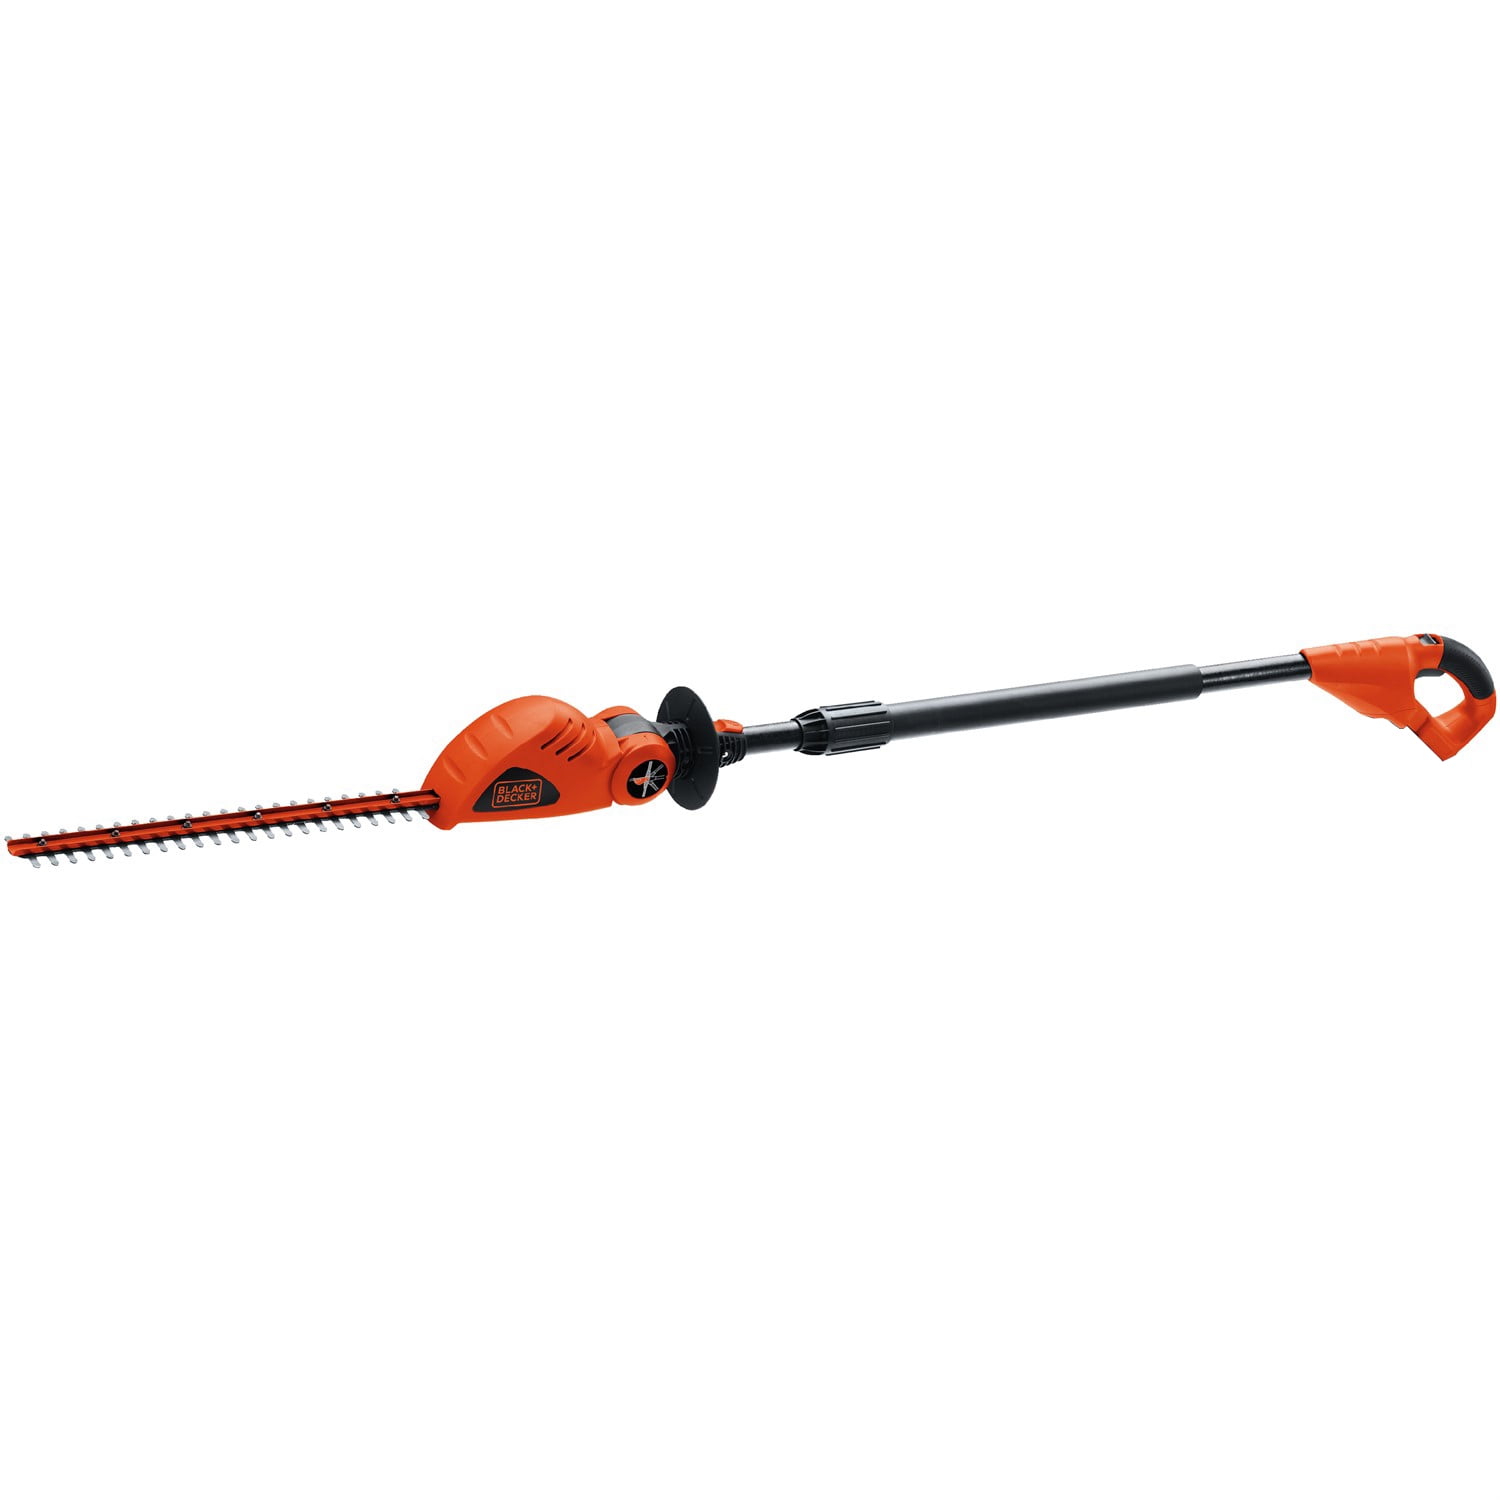 Black + Decker 40v Max Lithium 24 In. Hedge Trimmer - Bare Tool